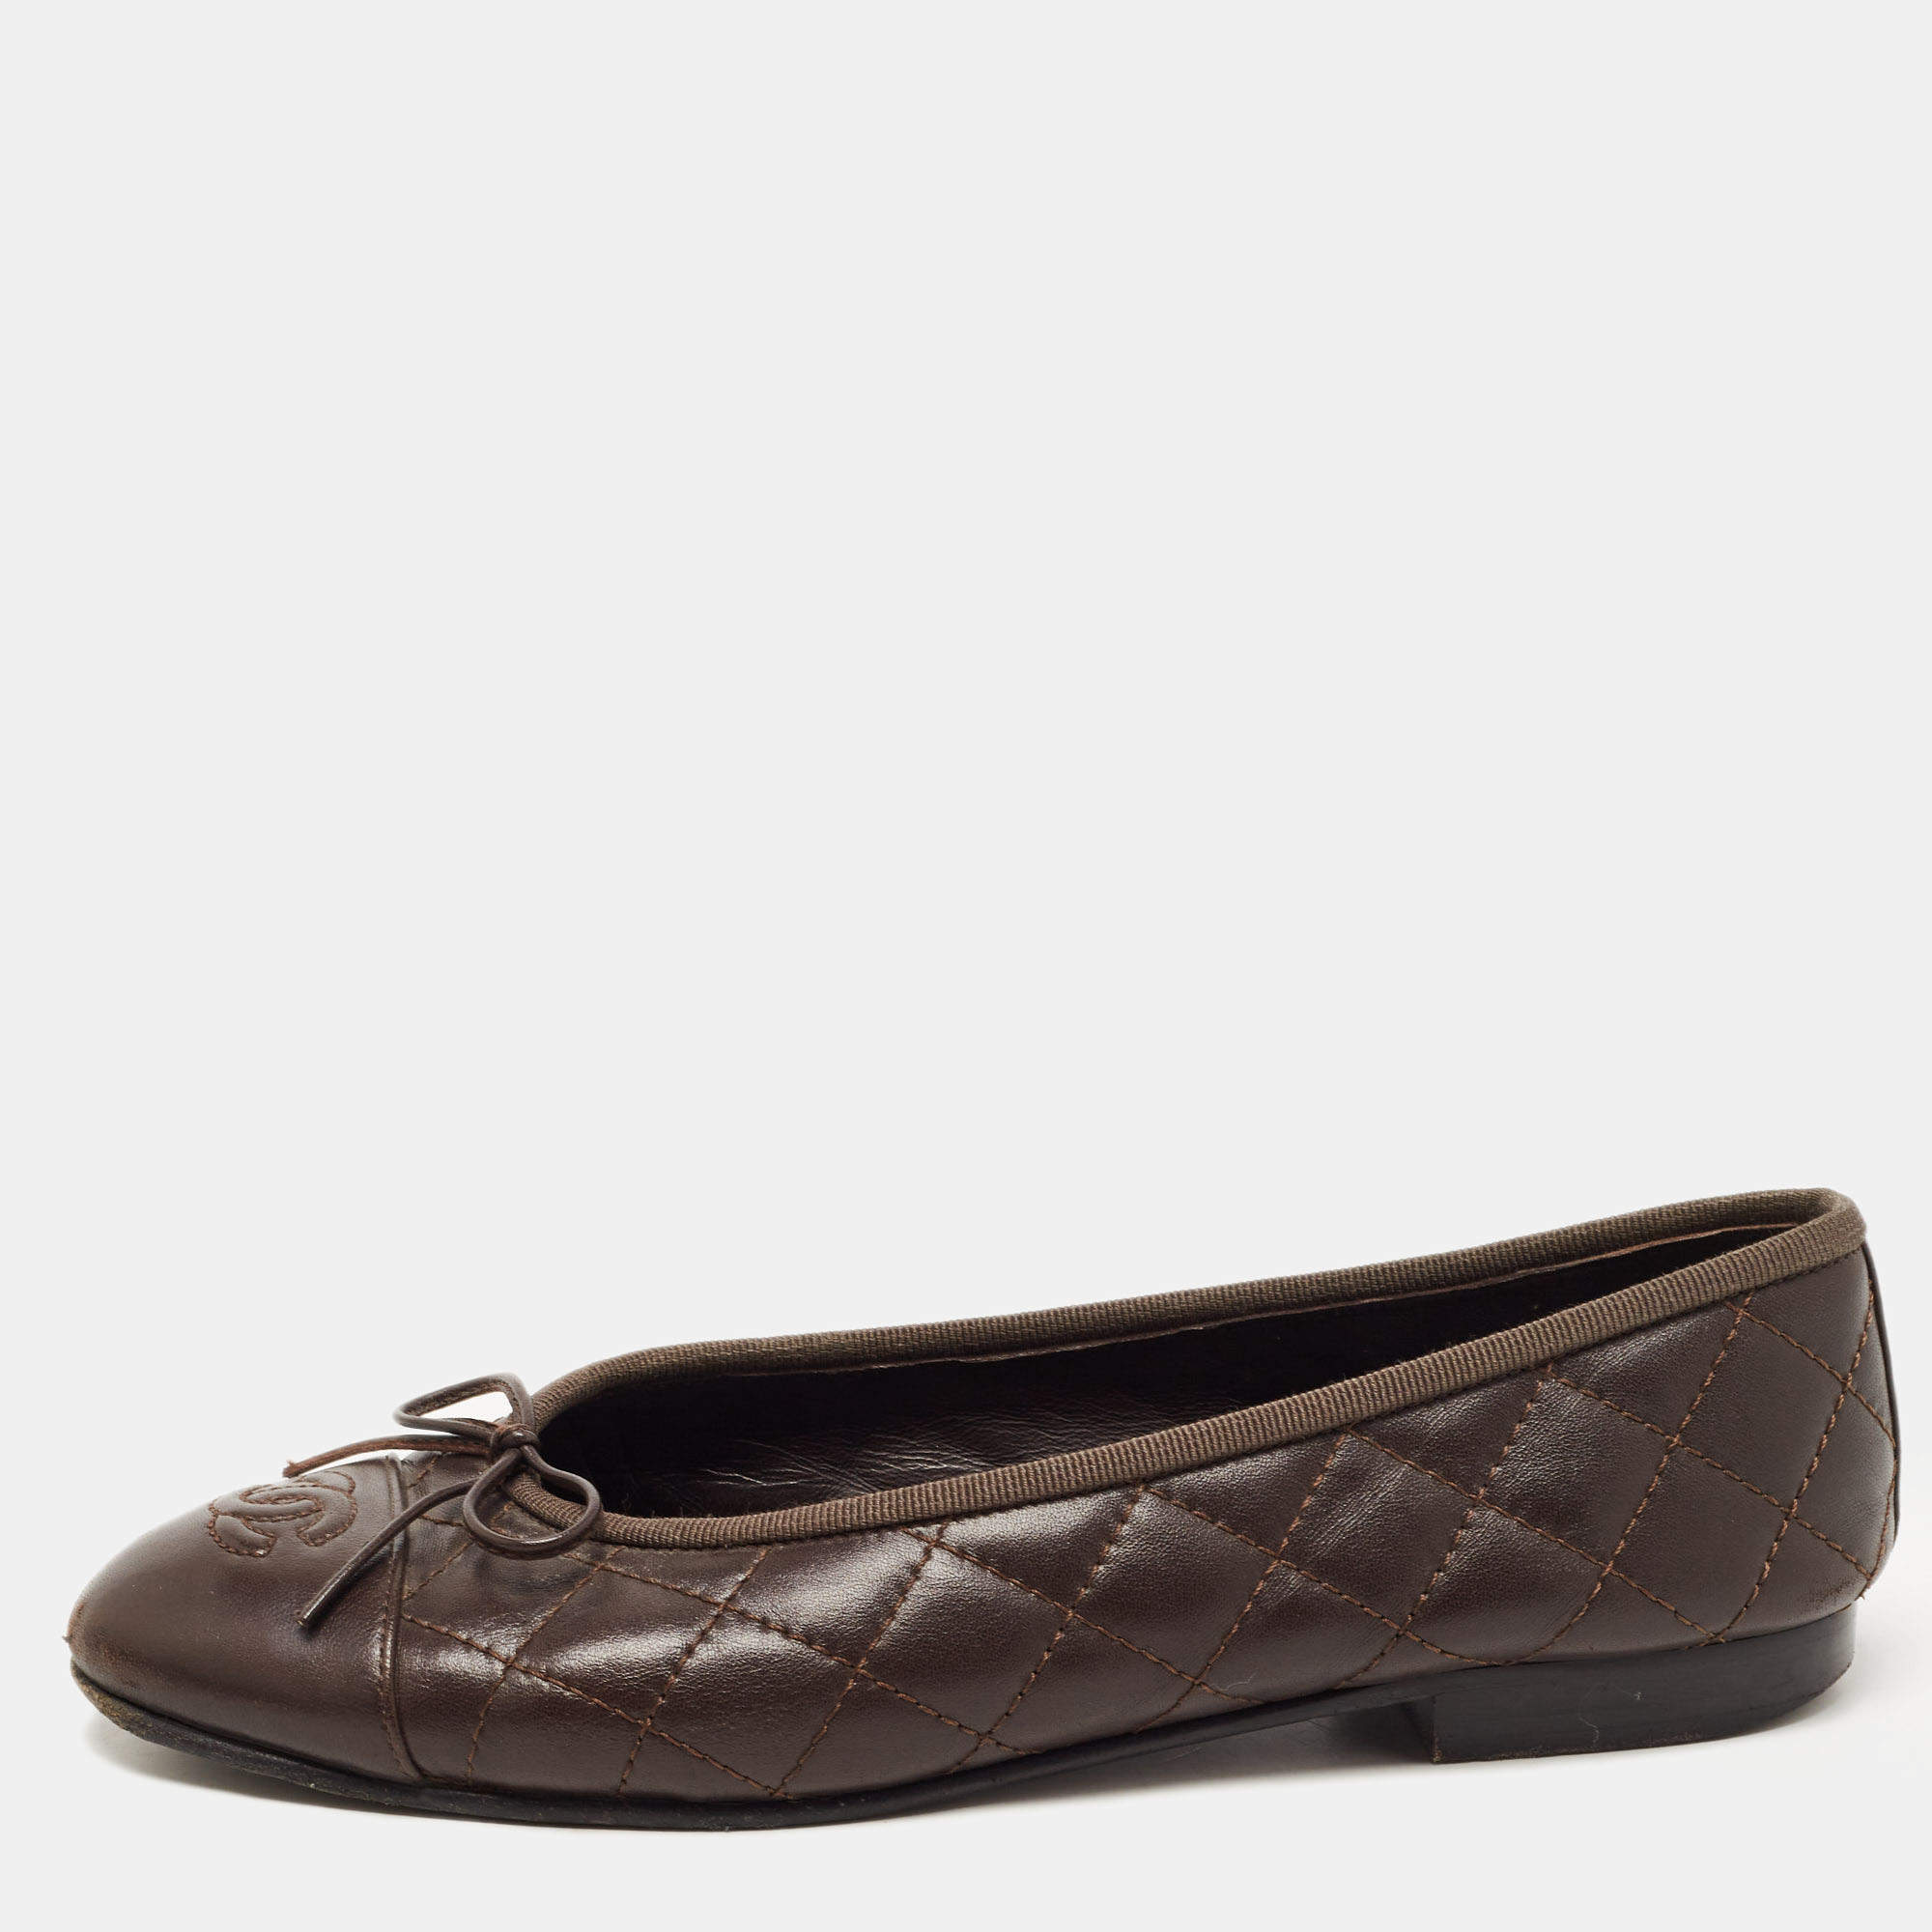 Chanel Dark 37.5 CC Size Flats Chanel Ballet | Bow TLC Leather Quilted Brown